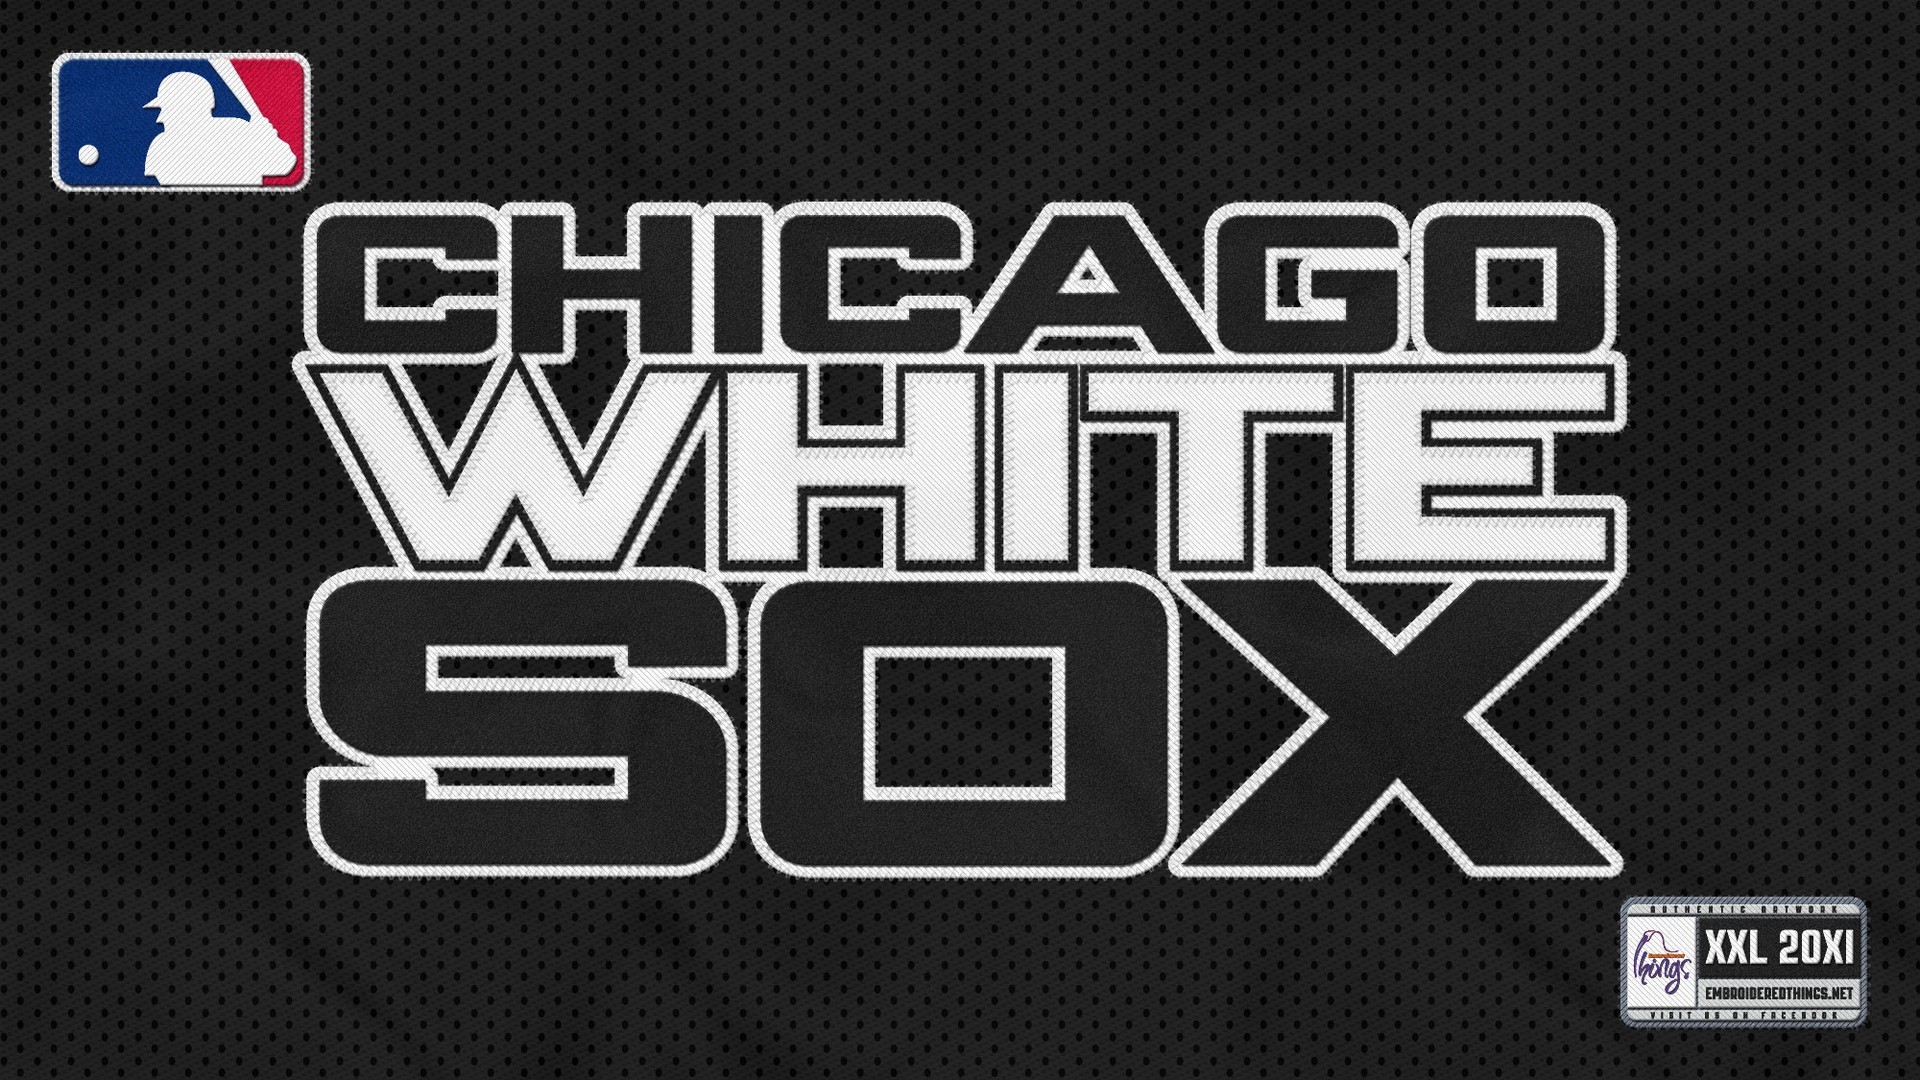 1920x1080 Chicago white sox logo hd wallpaper background HD Wallpapers 